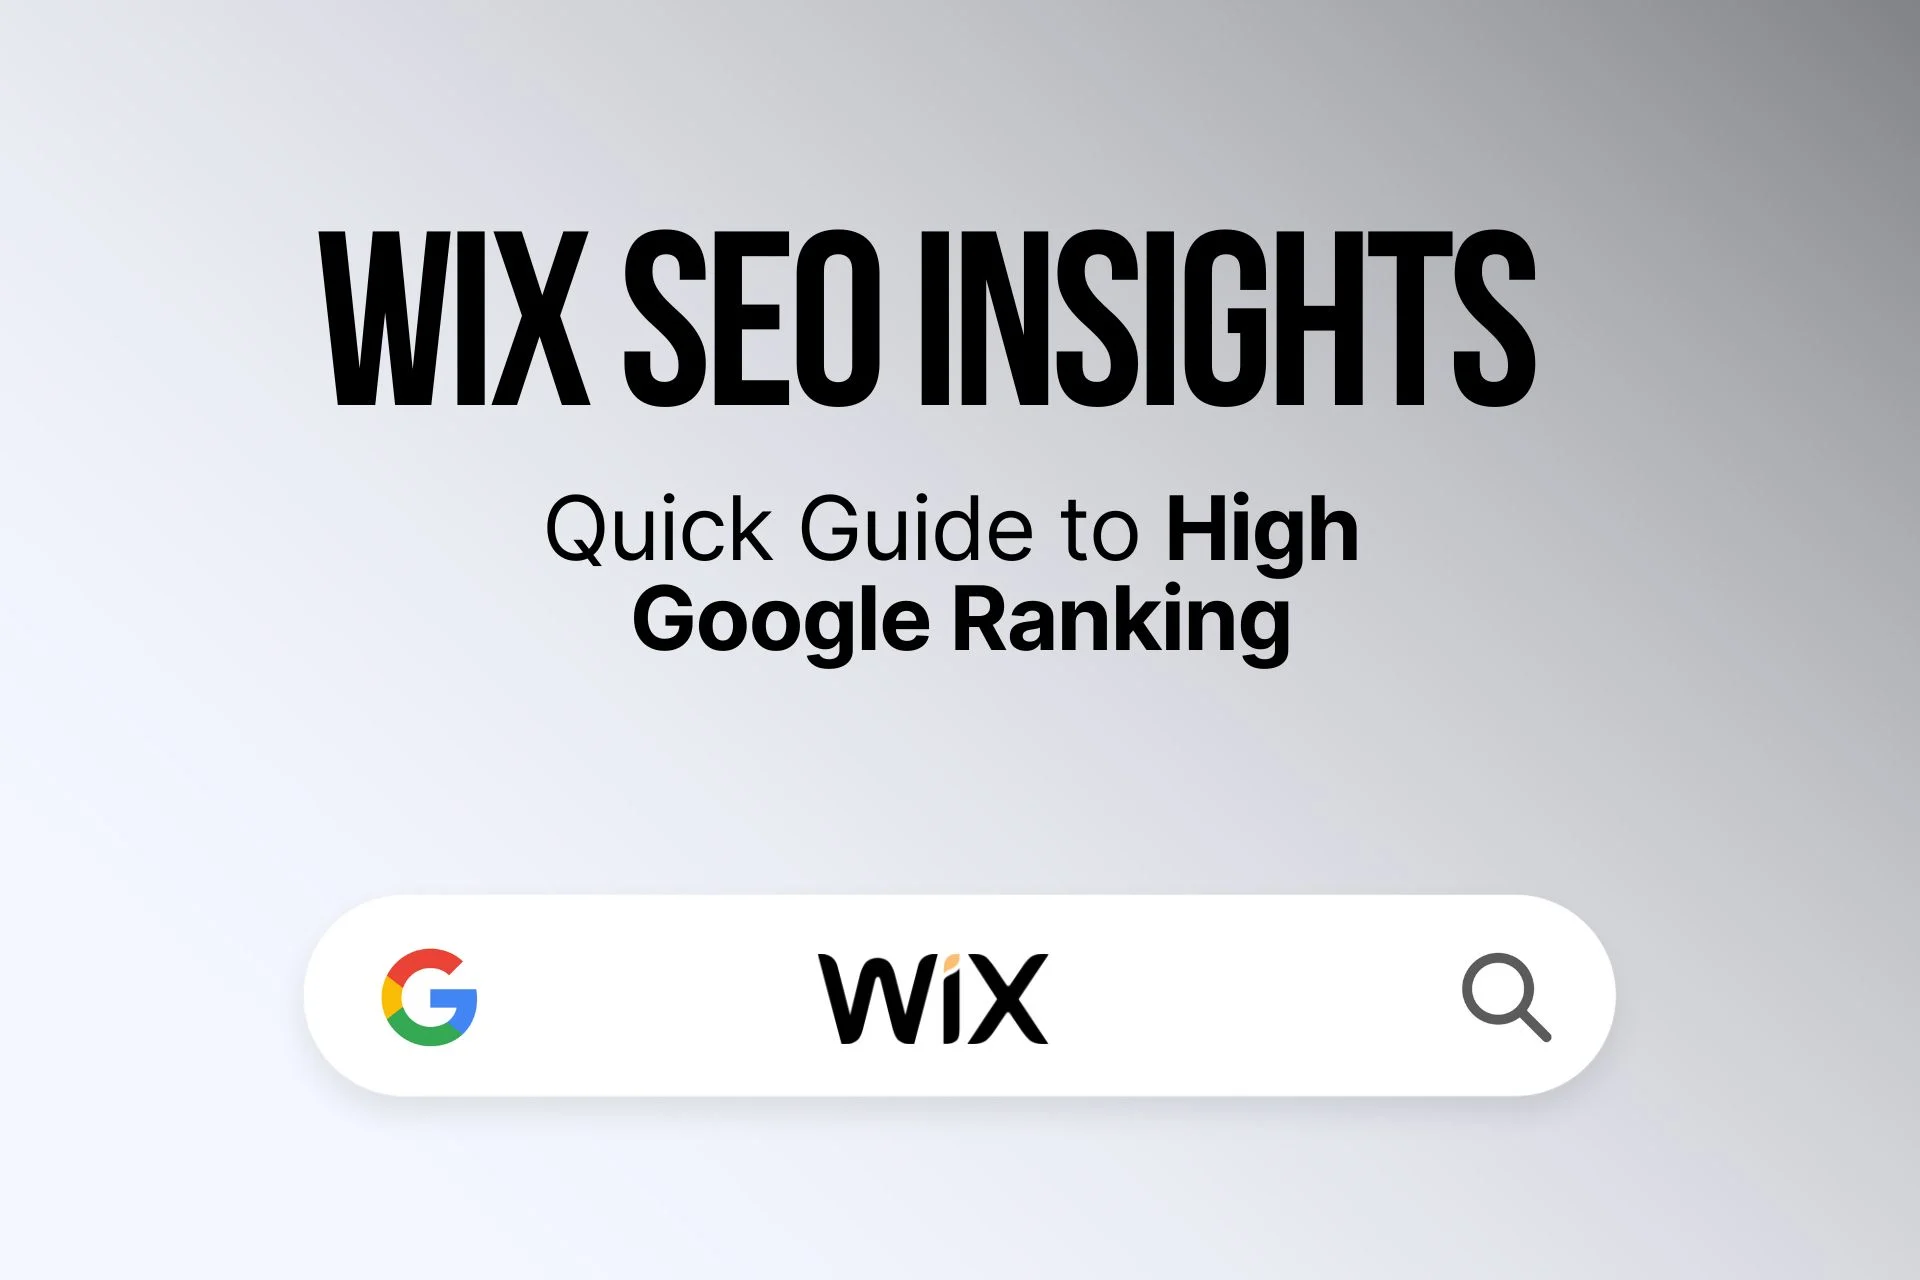 wix seo insights cover image with an illustration of Google search result and Wix logo